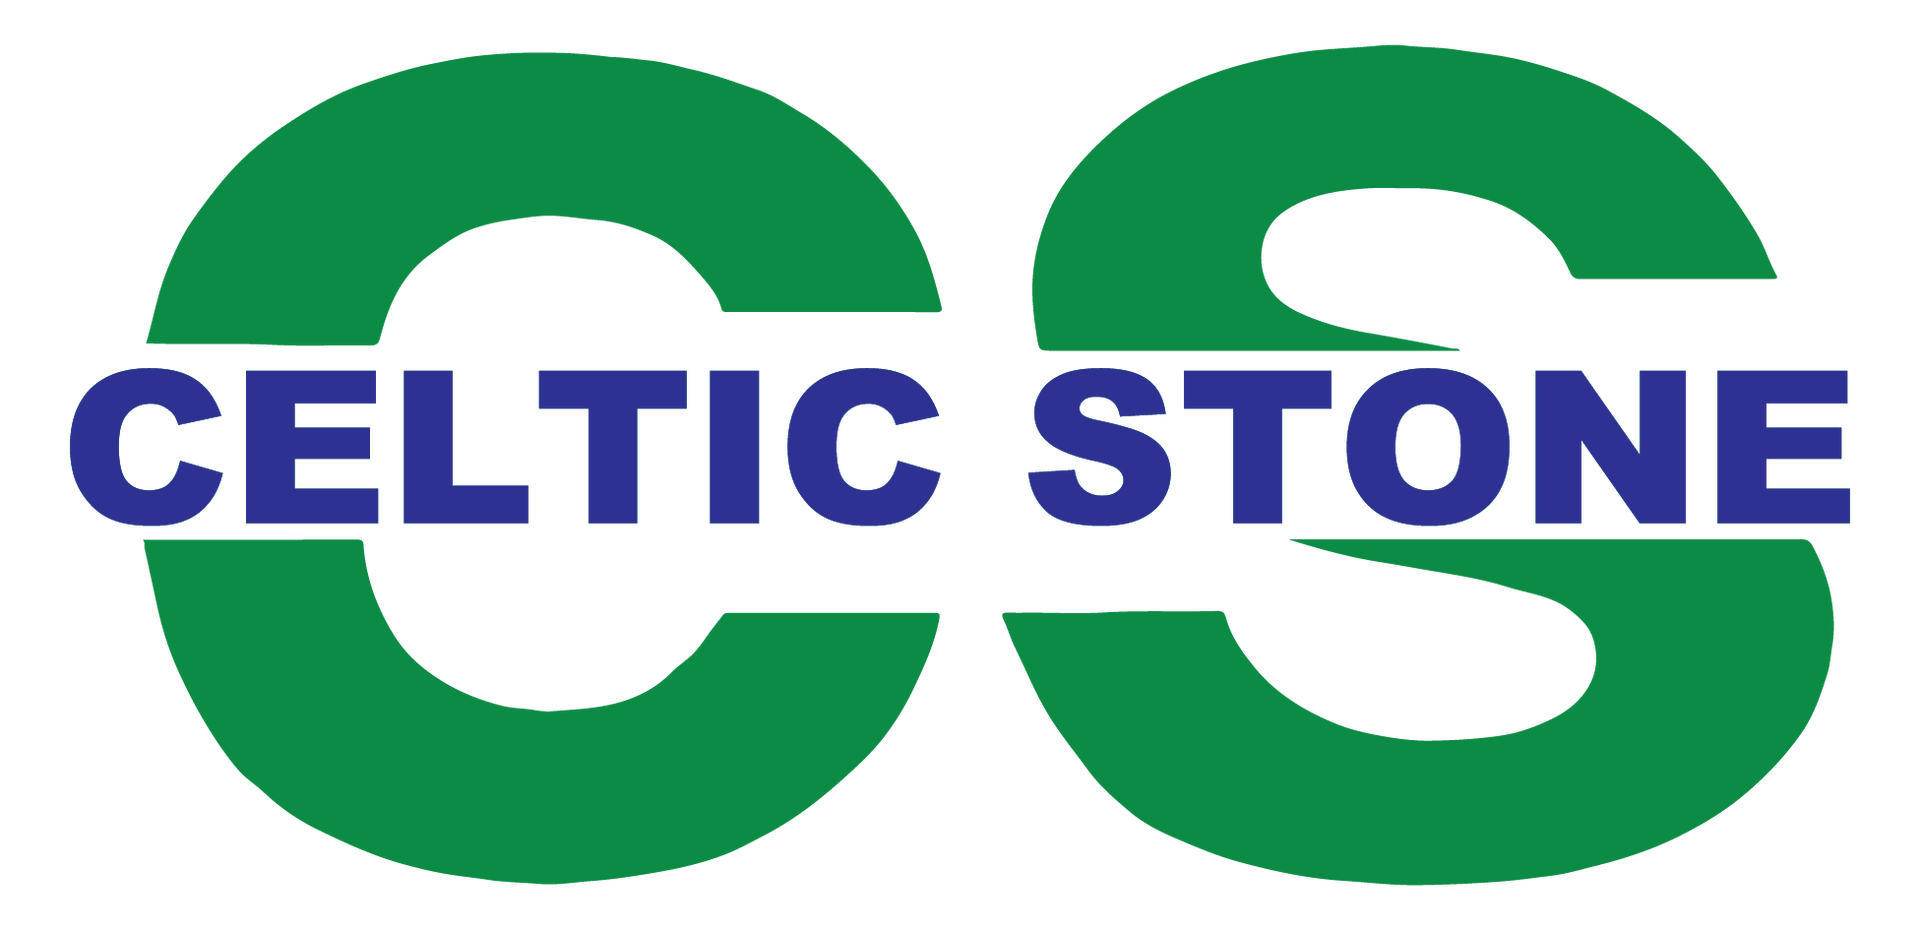 The celtic stone logo is green and blue on a white background.